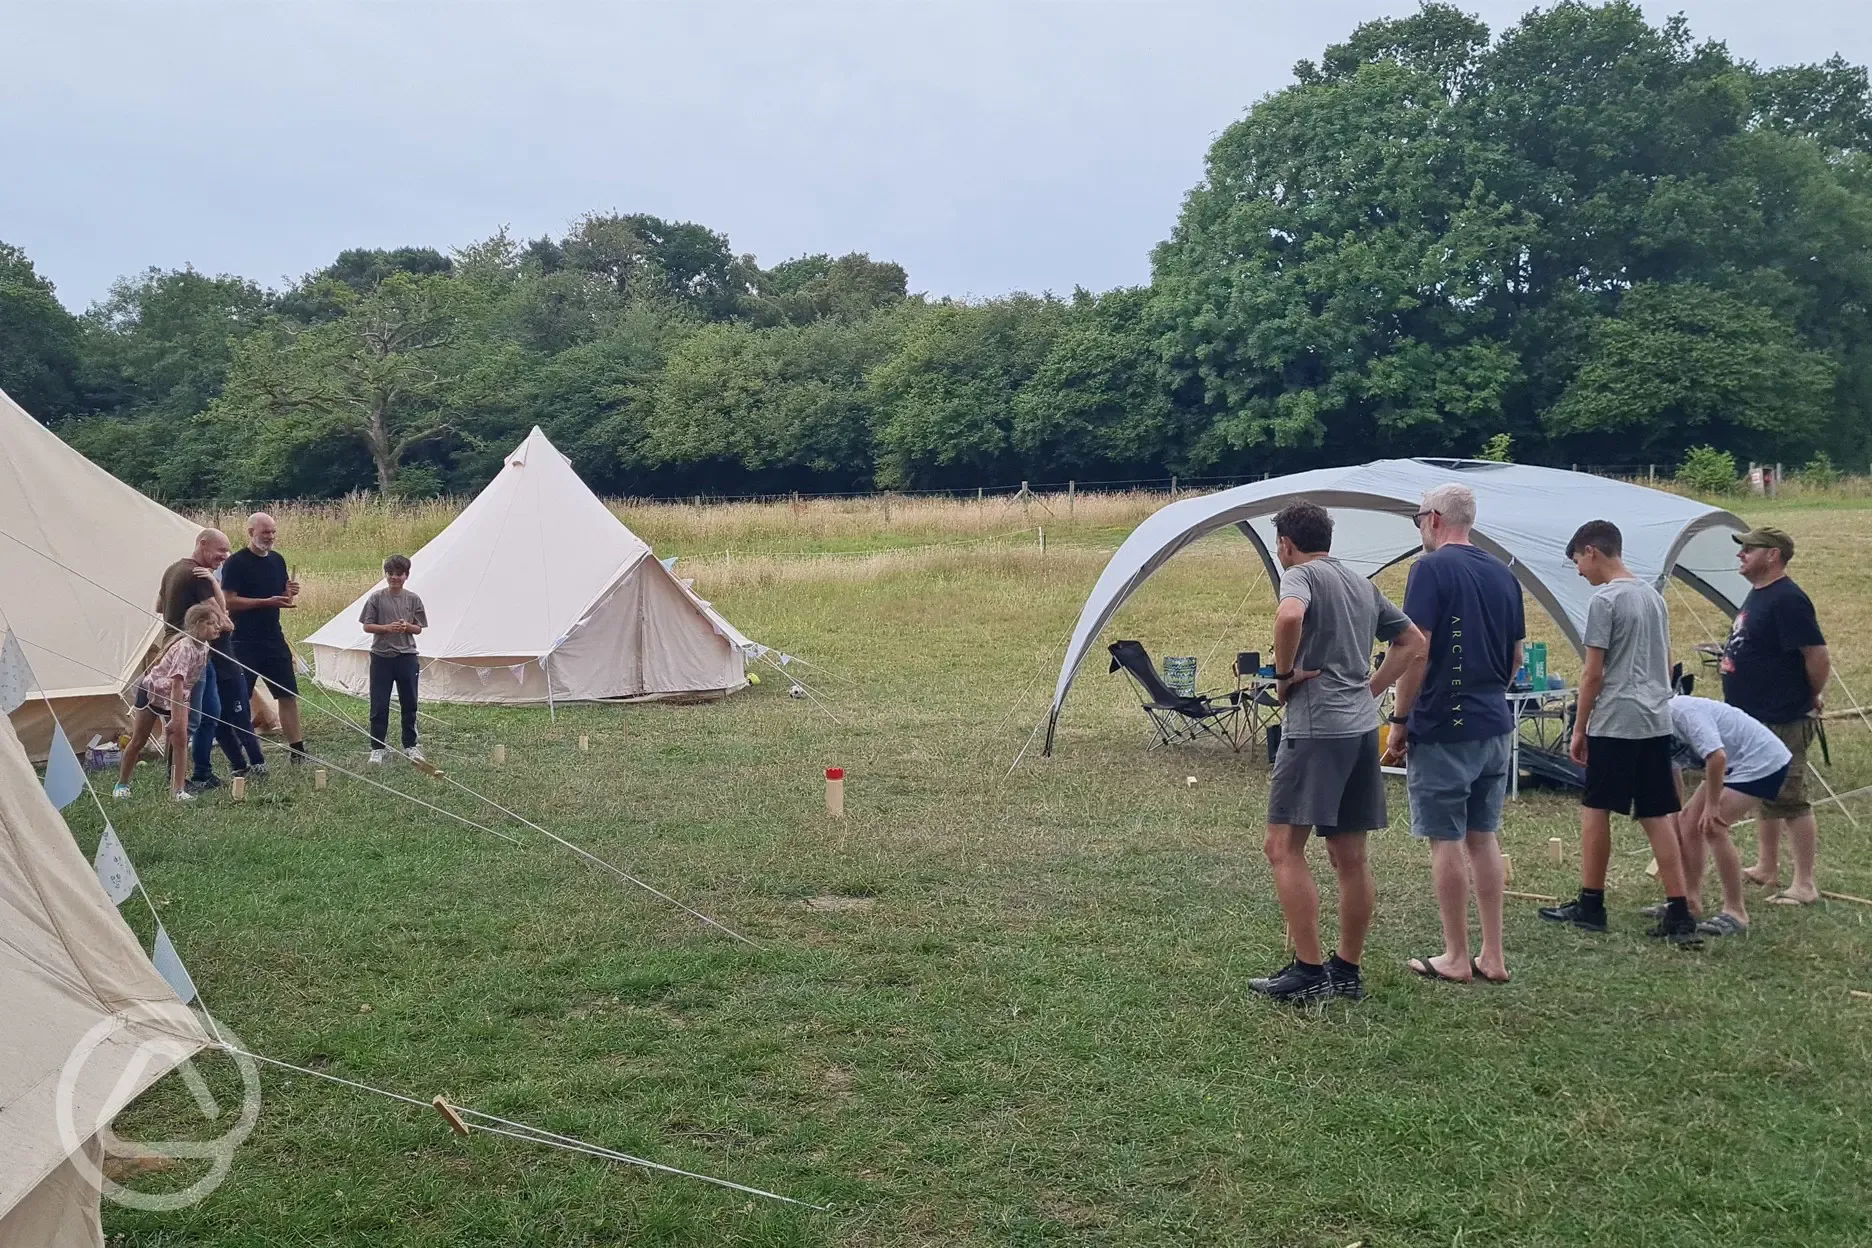 Games in the camping field 